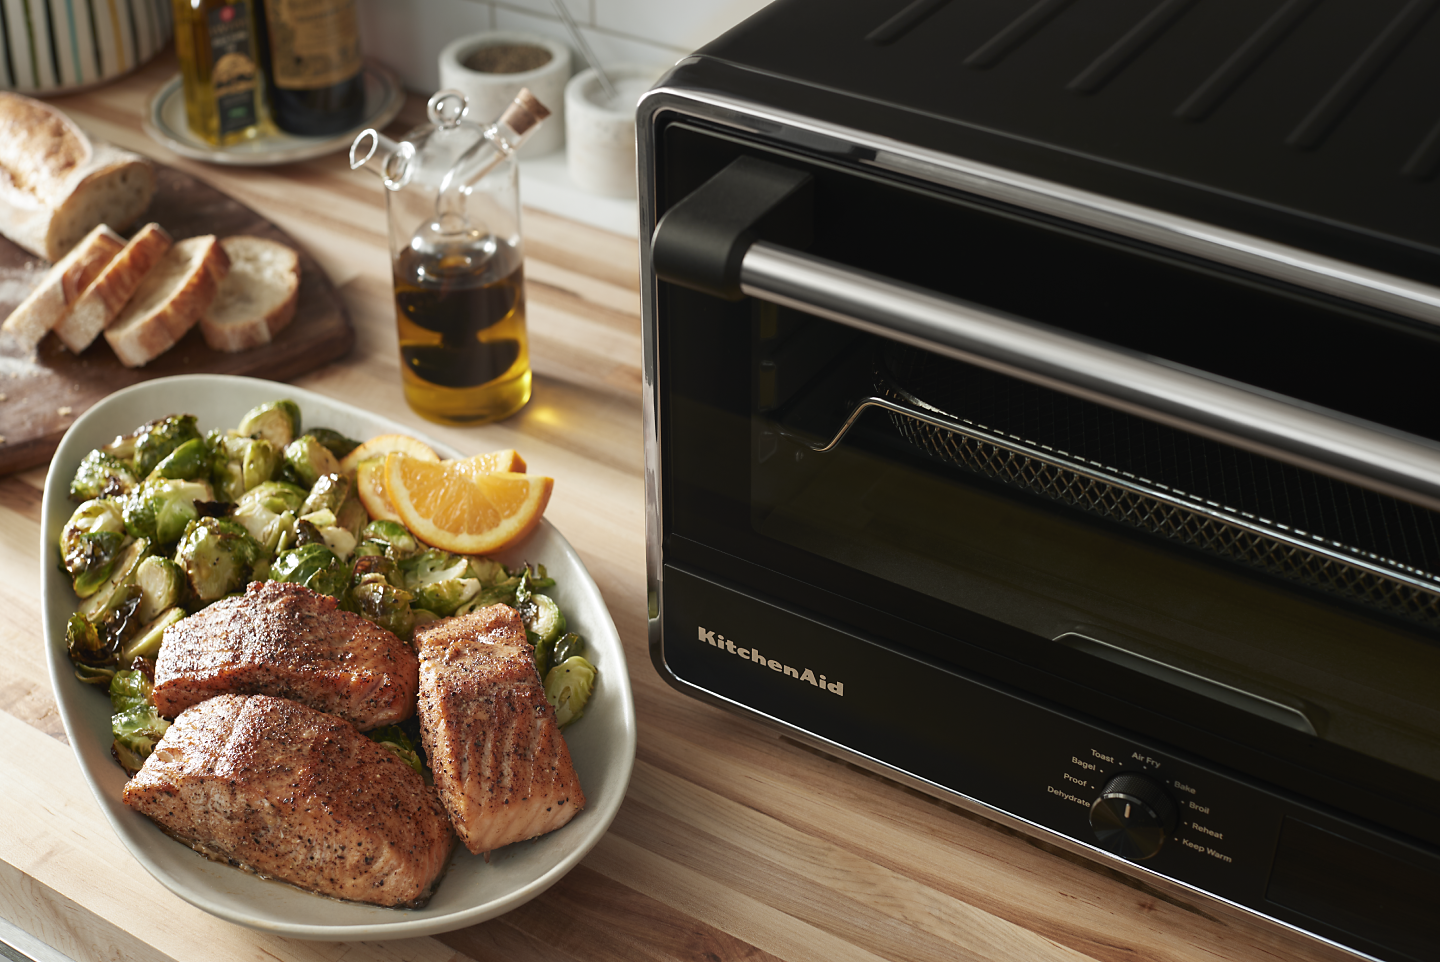 KitchenAid® countertop oven next to a plate of cooked salmon with roasted brussel sprouts and lemon wedges